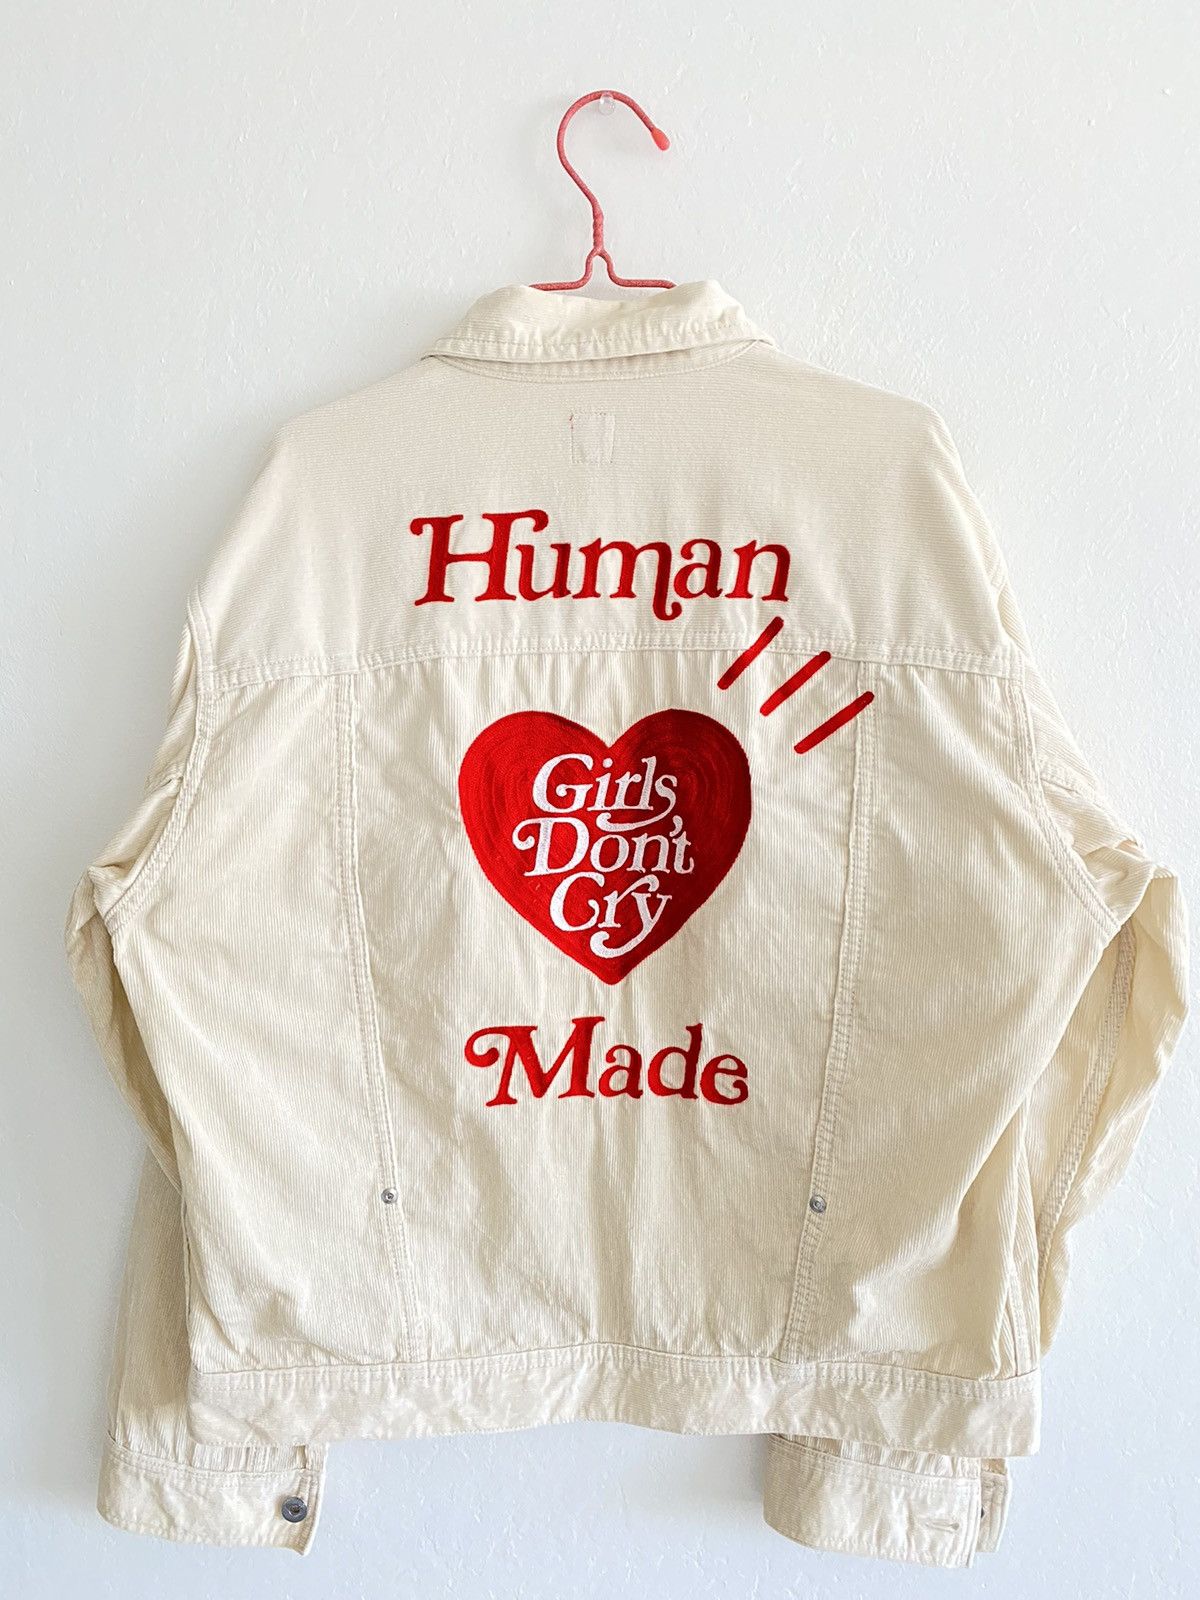 Human Made Human Made x Girls Don't Cry Work Jacket | Grailed